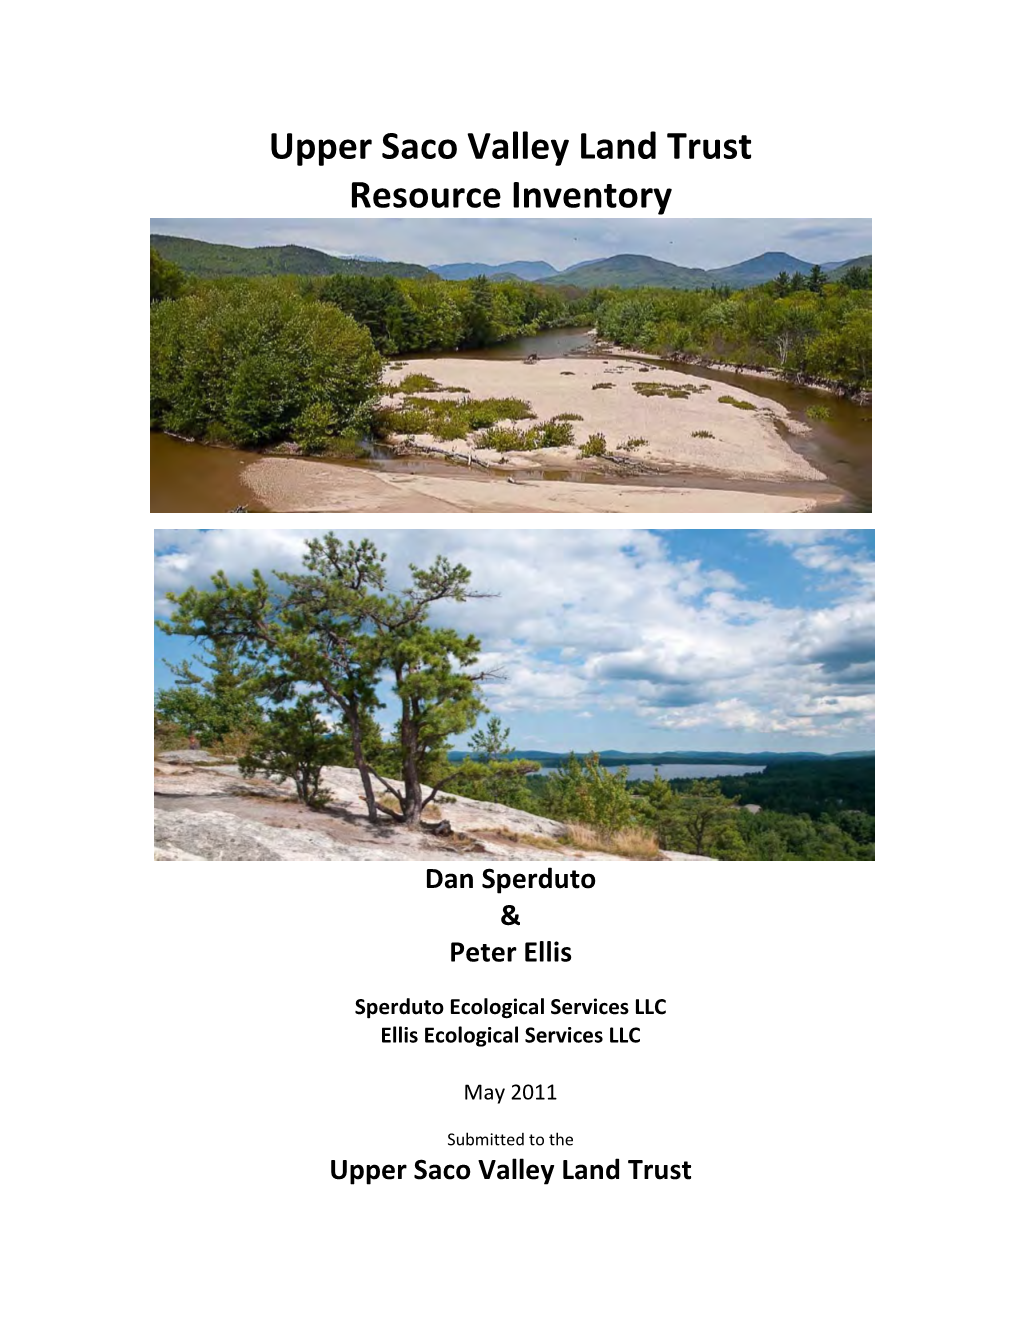 Natural Resource Inventory